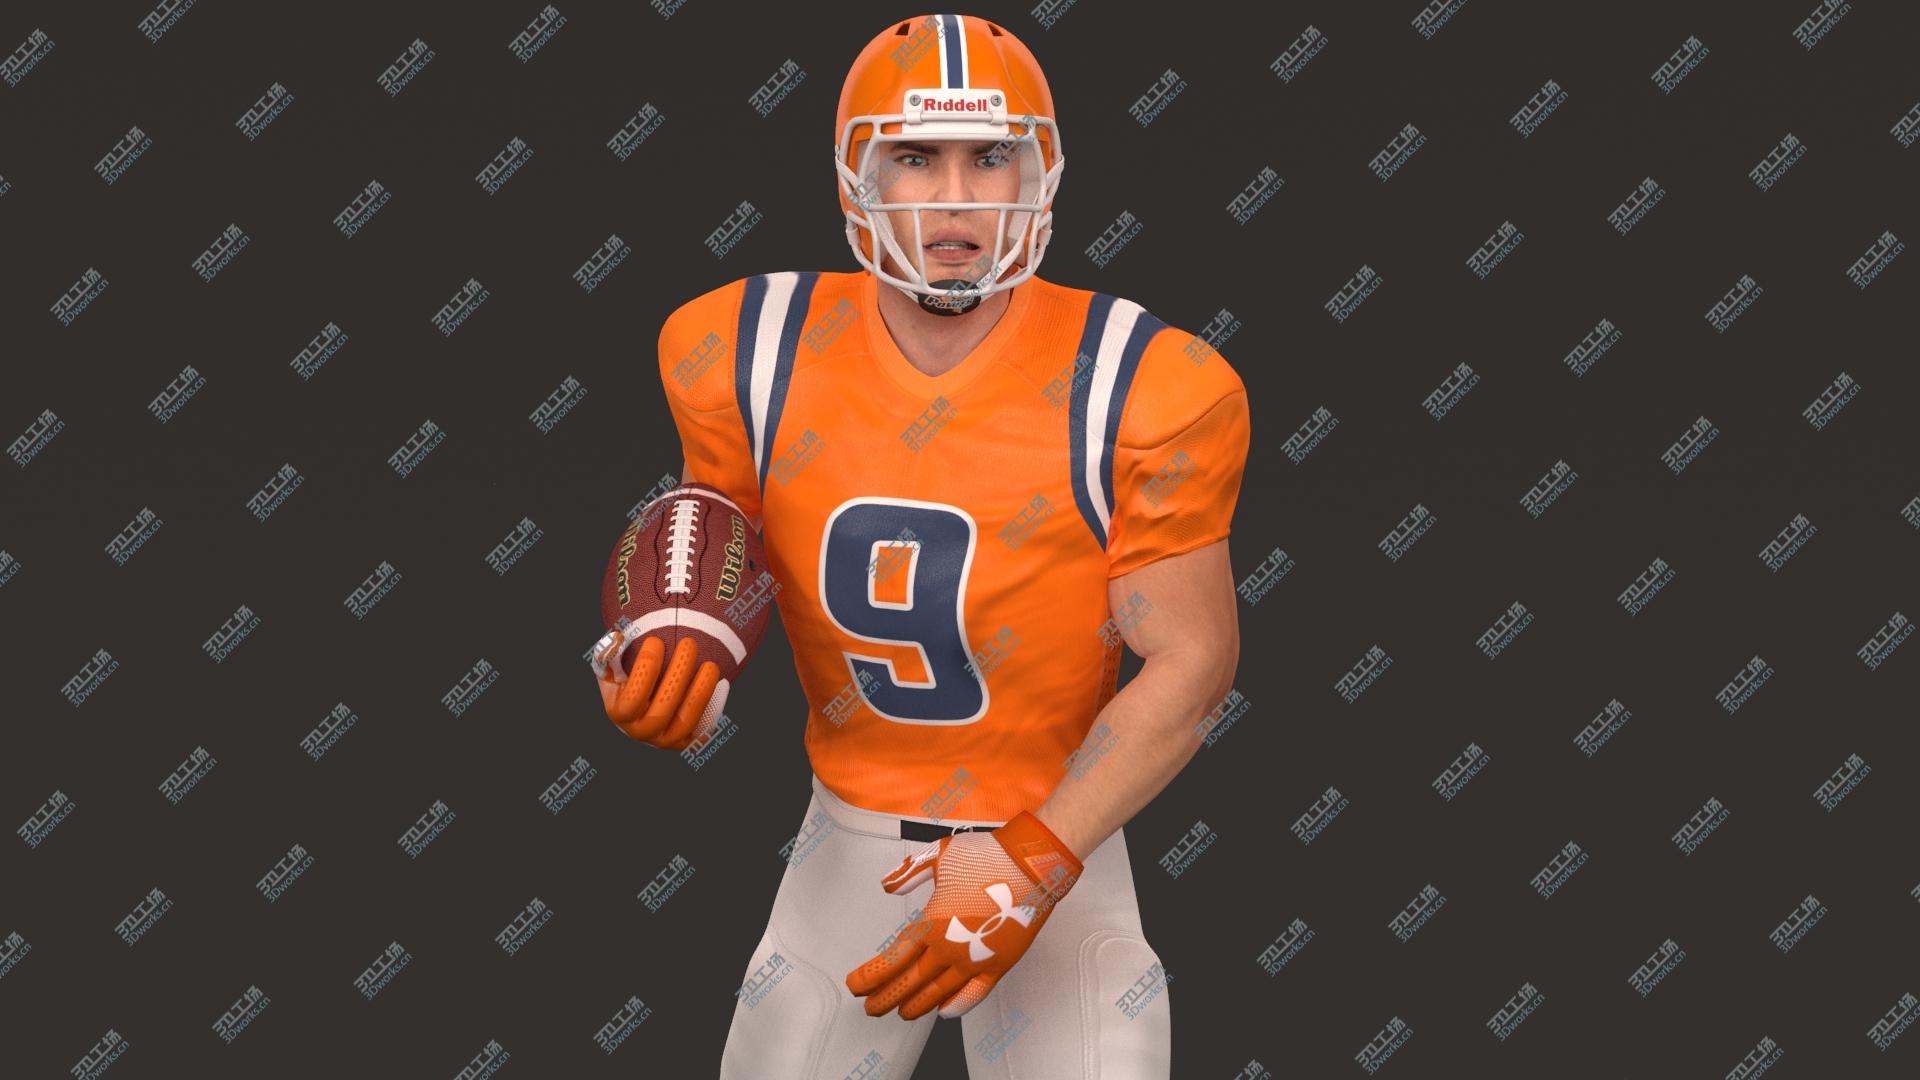 images/goods_img/20210313/3D American Football Player 2020 V6 Rigged/1.jpg